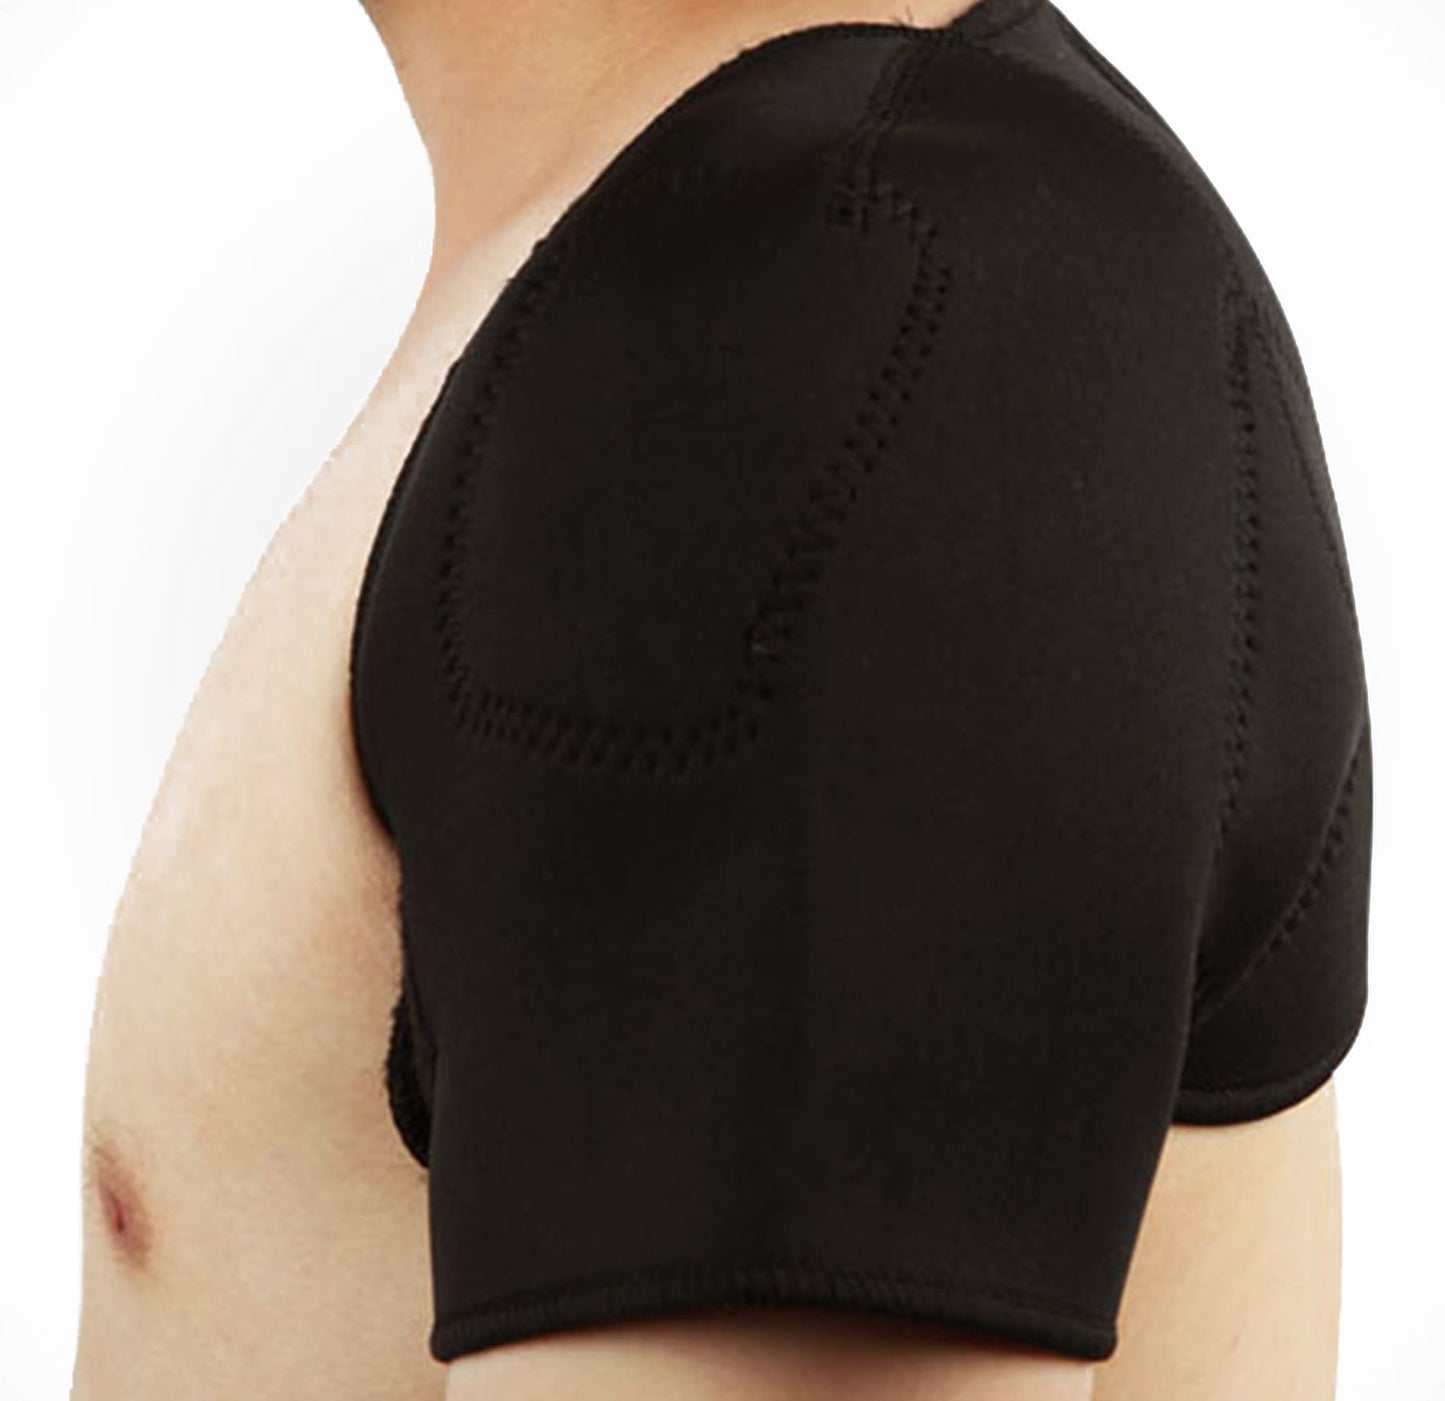 Shoulder Brace, with Self-heating and Magnets for Shoulder Pain Relief